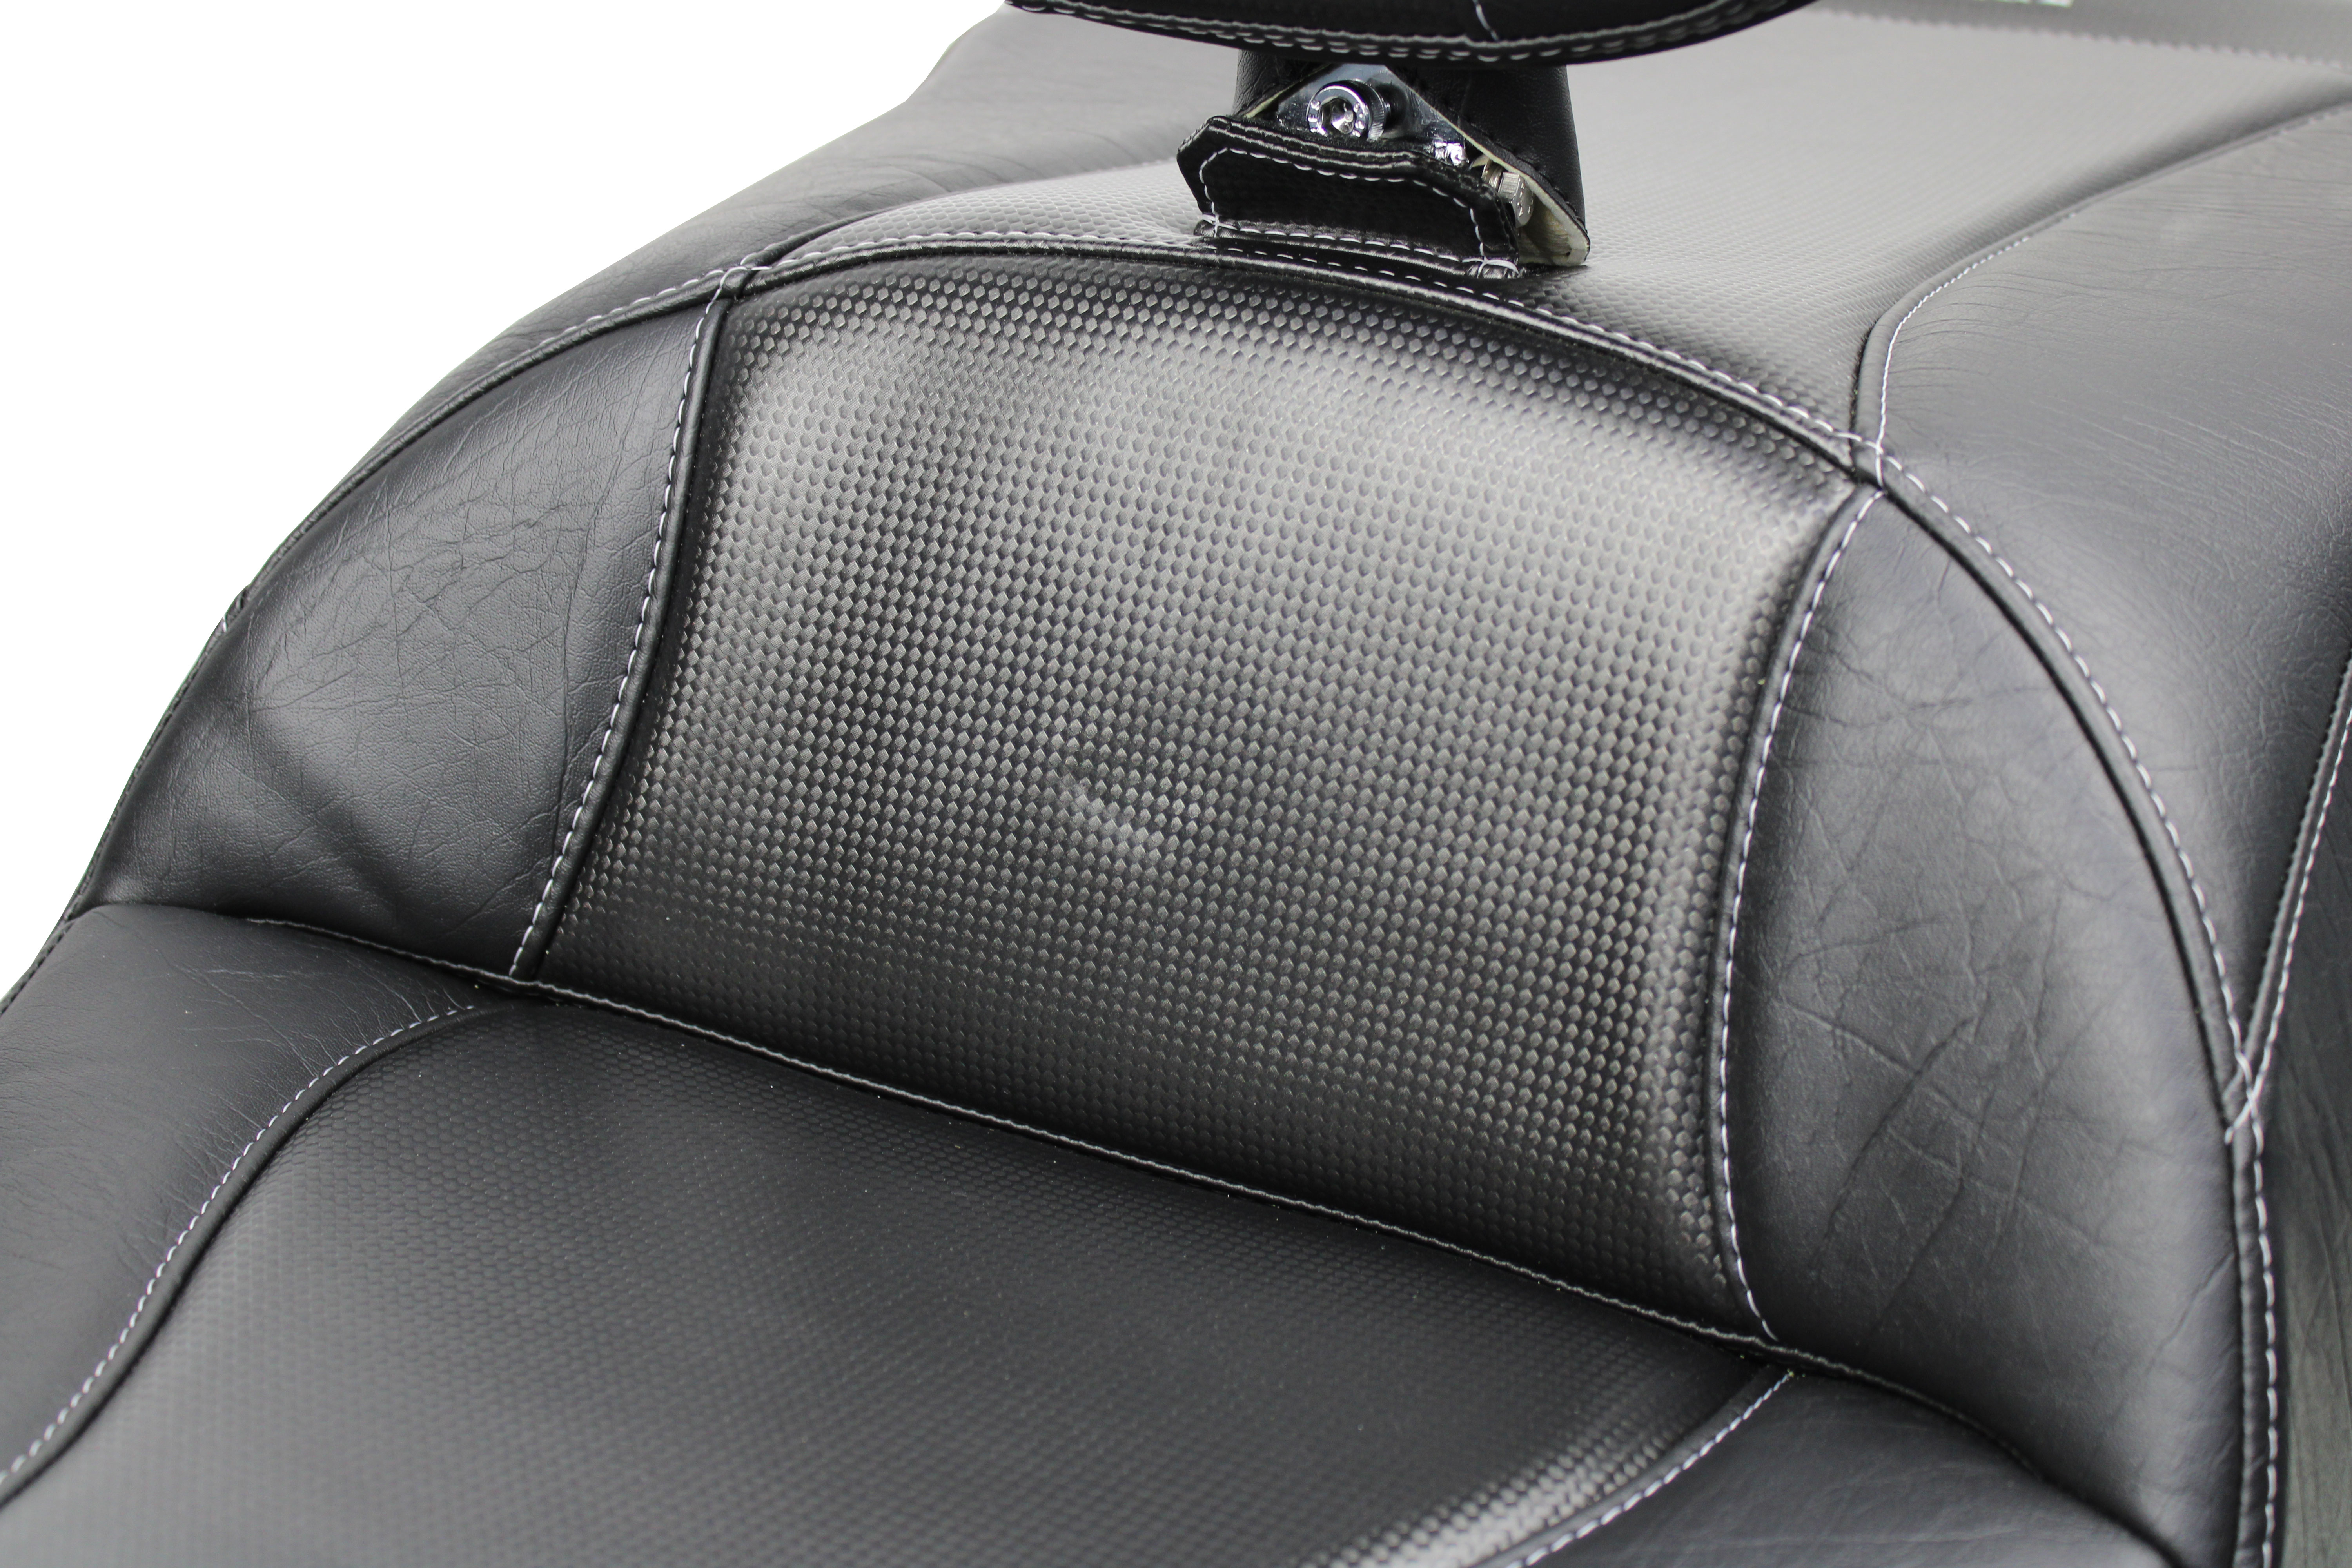 Goldwing Seat and Driver Backrest - Apex Carbon Fiber Inlay (2018 and Newer)